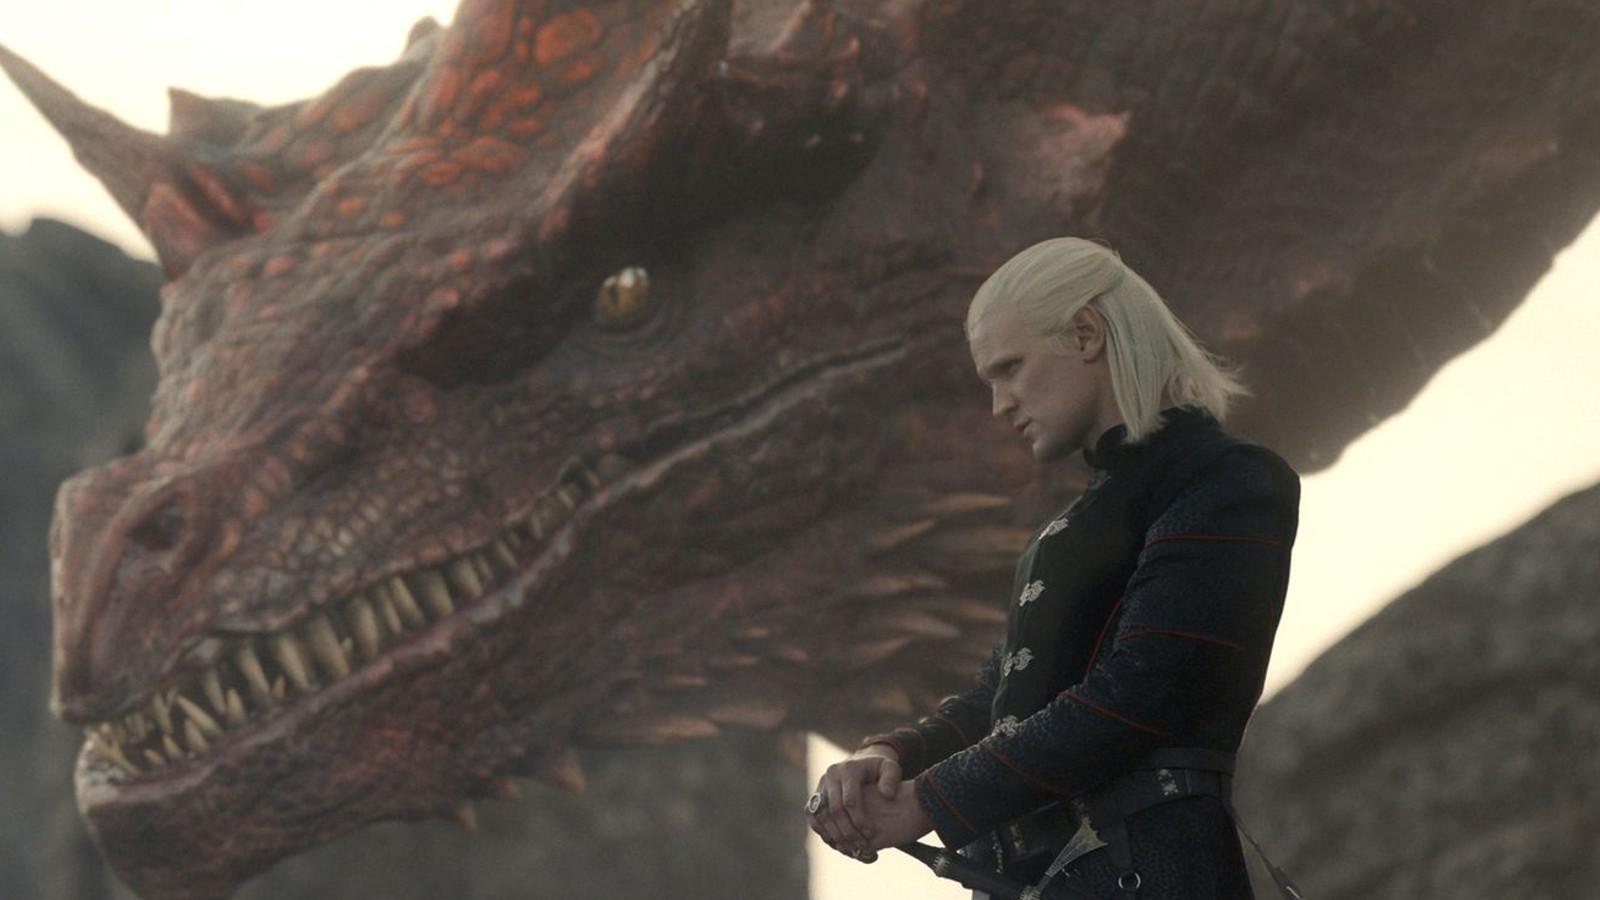 House Of The Dragon' To Air Season 2 On HBO In Summer 2024 – Deadline